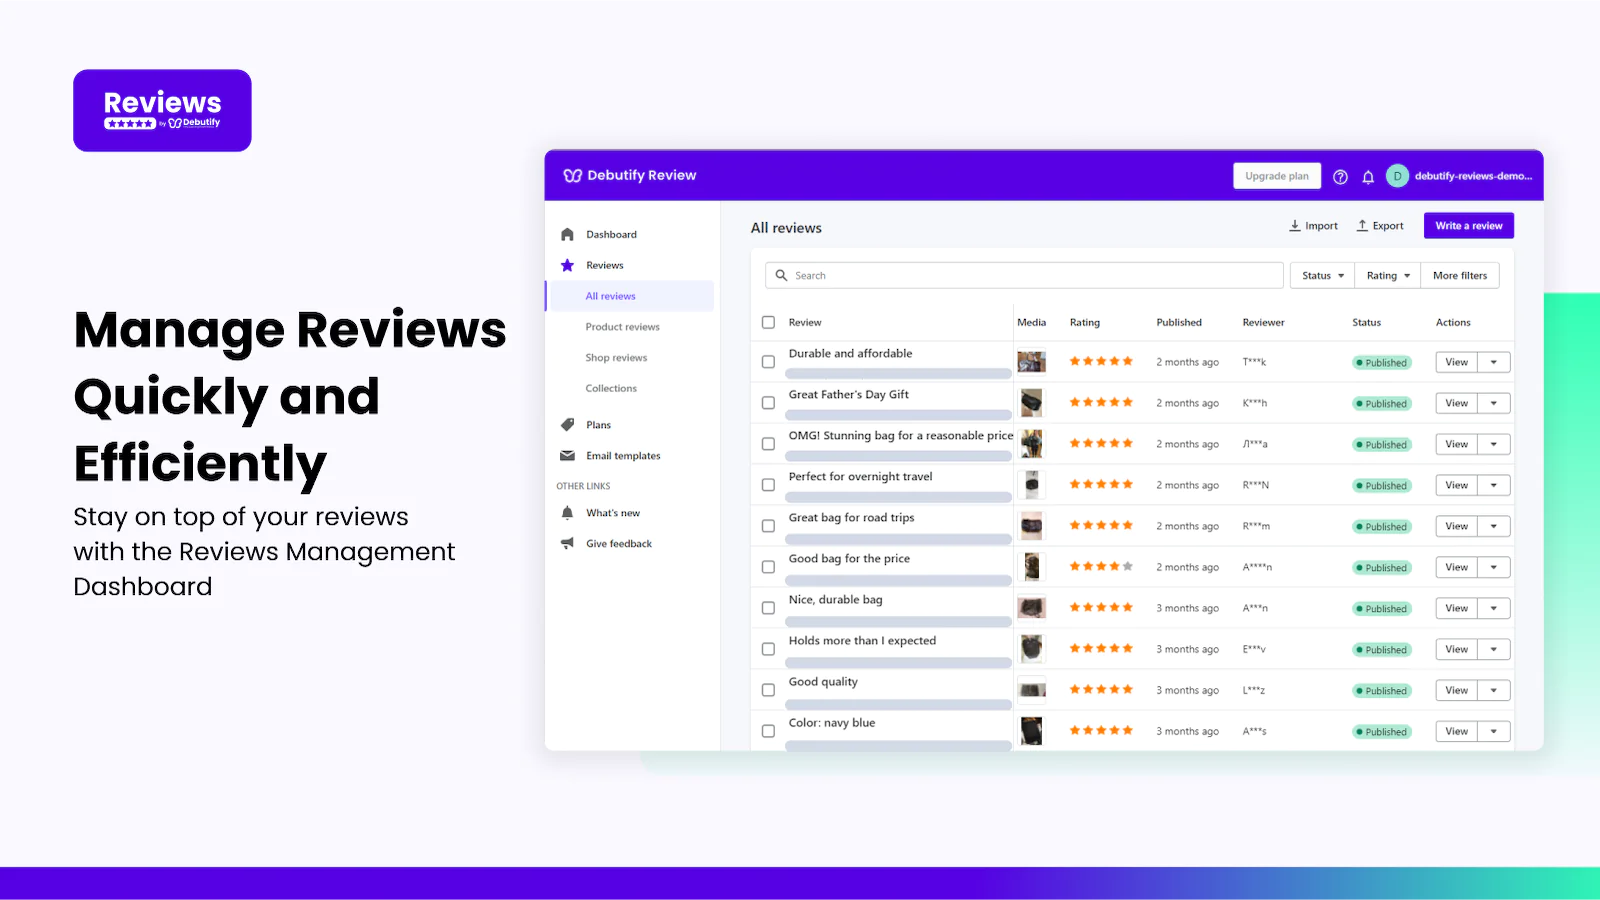 Stay on top of your reviews with the Reviews Management Dashboard.